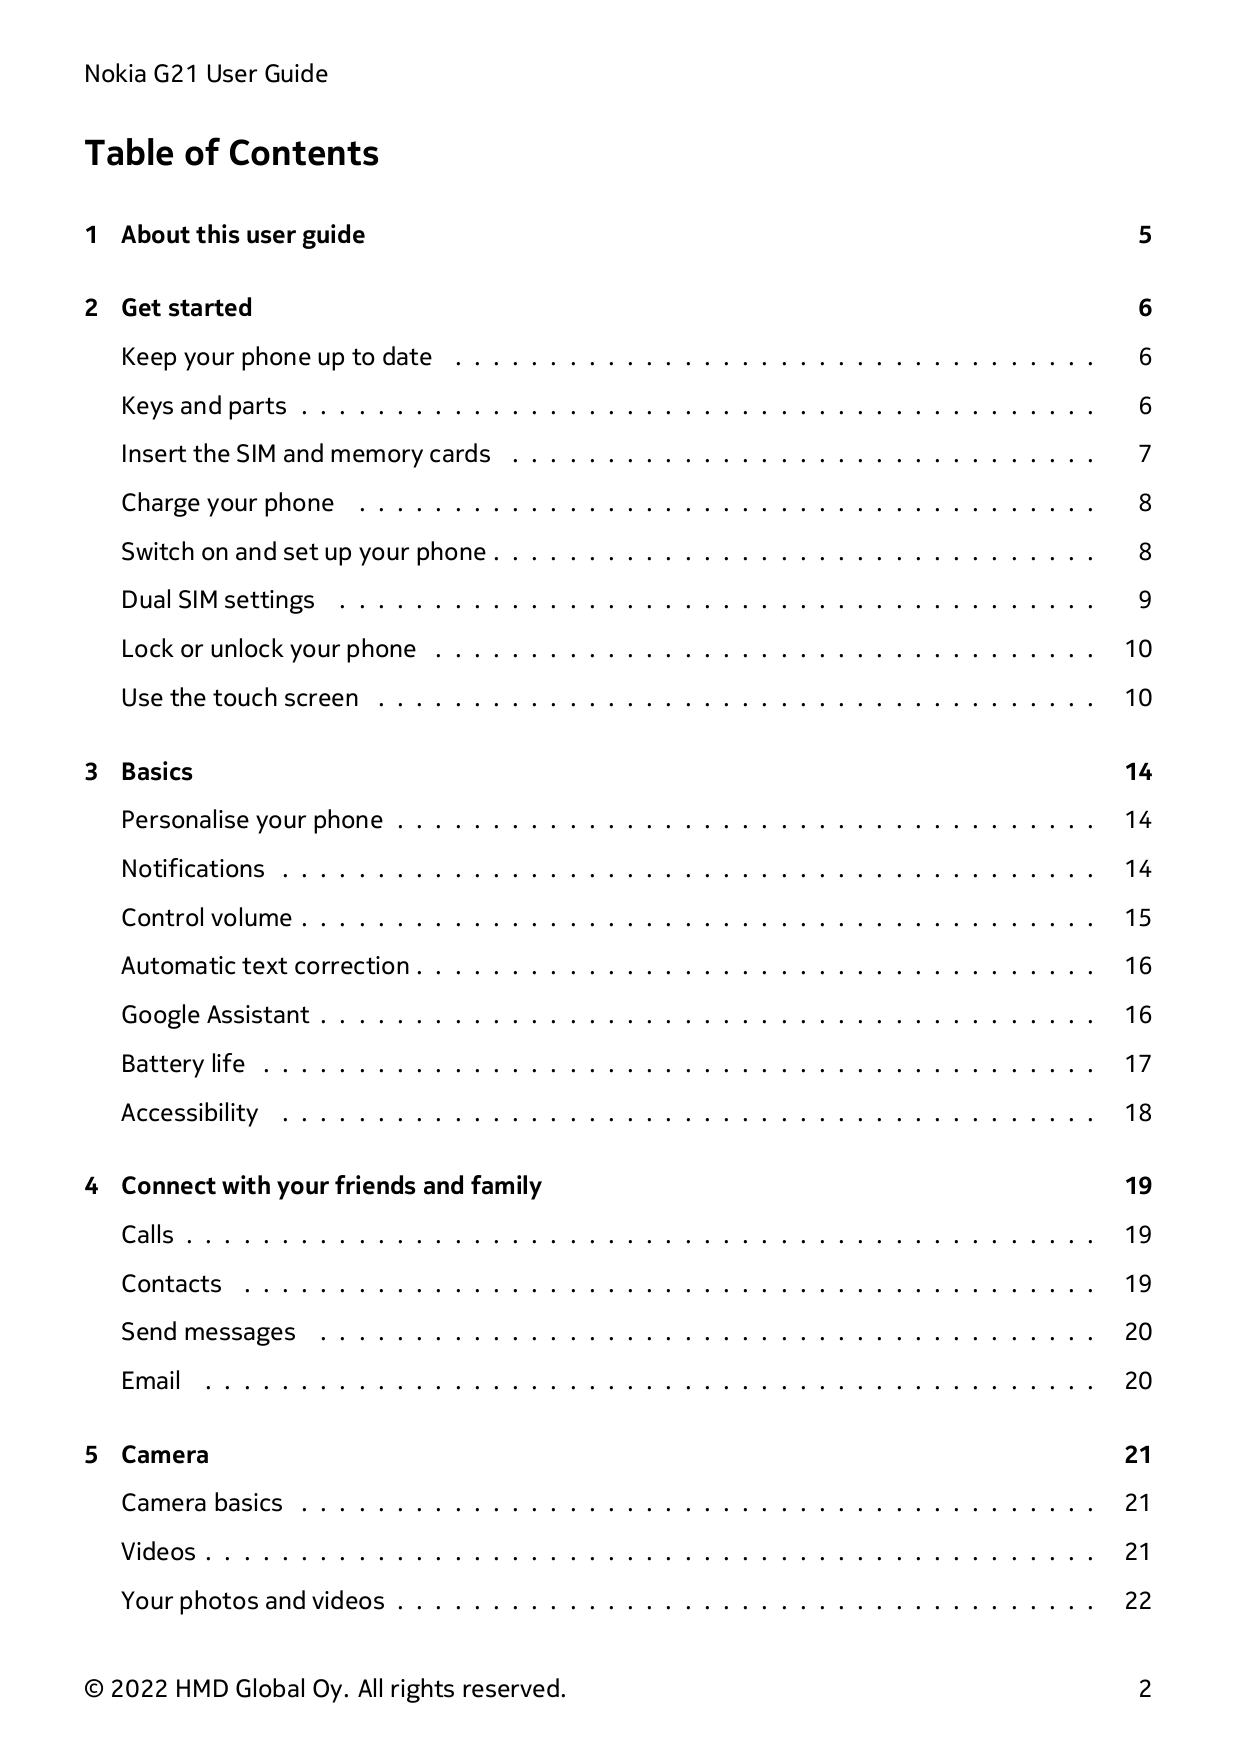 Nokia G21 User GuideTable of Contents1 About this user guide52 Get started6Keep your phone up to date . . . . . . . . . . . . . 